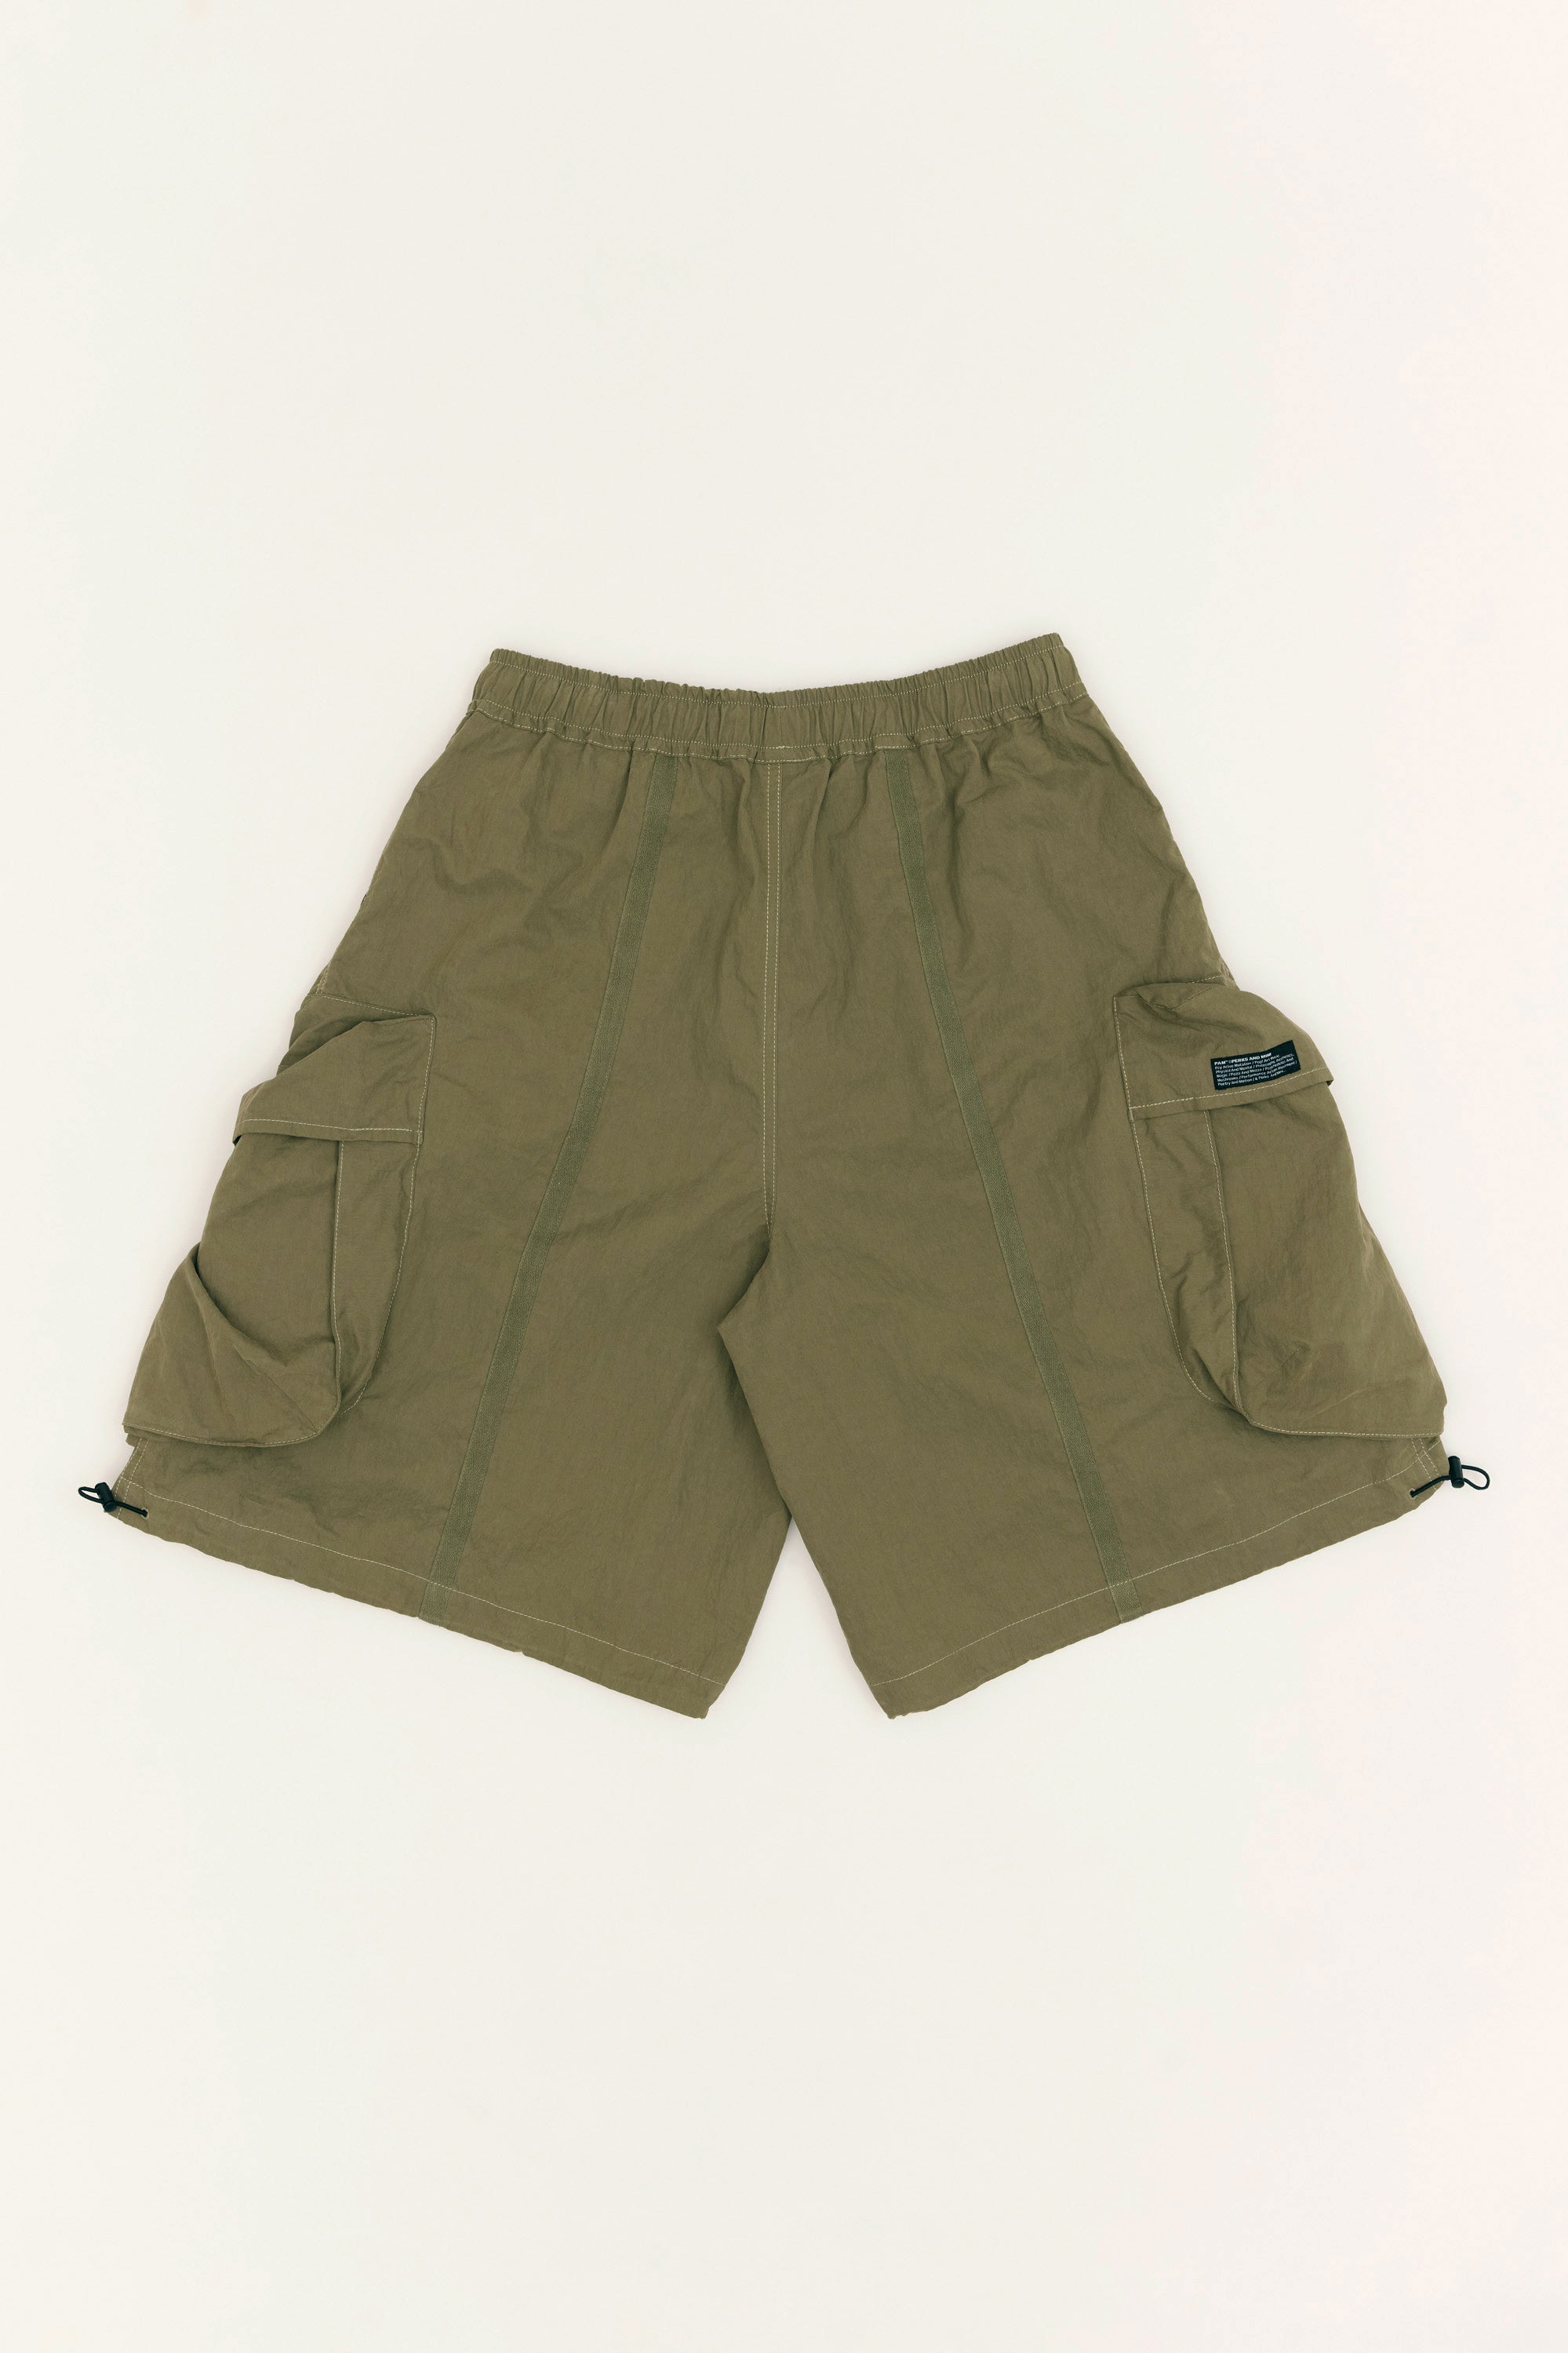 The GATEWAY CHOW SHORTS A  available online with global shipping, and in PAM Stores Melbourne and Sydney.